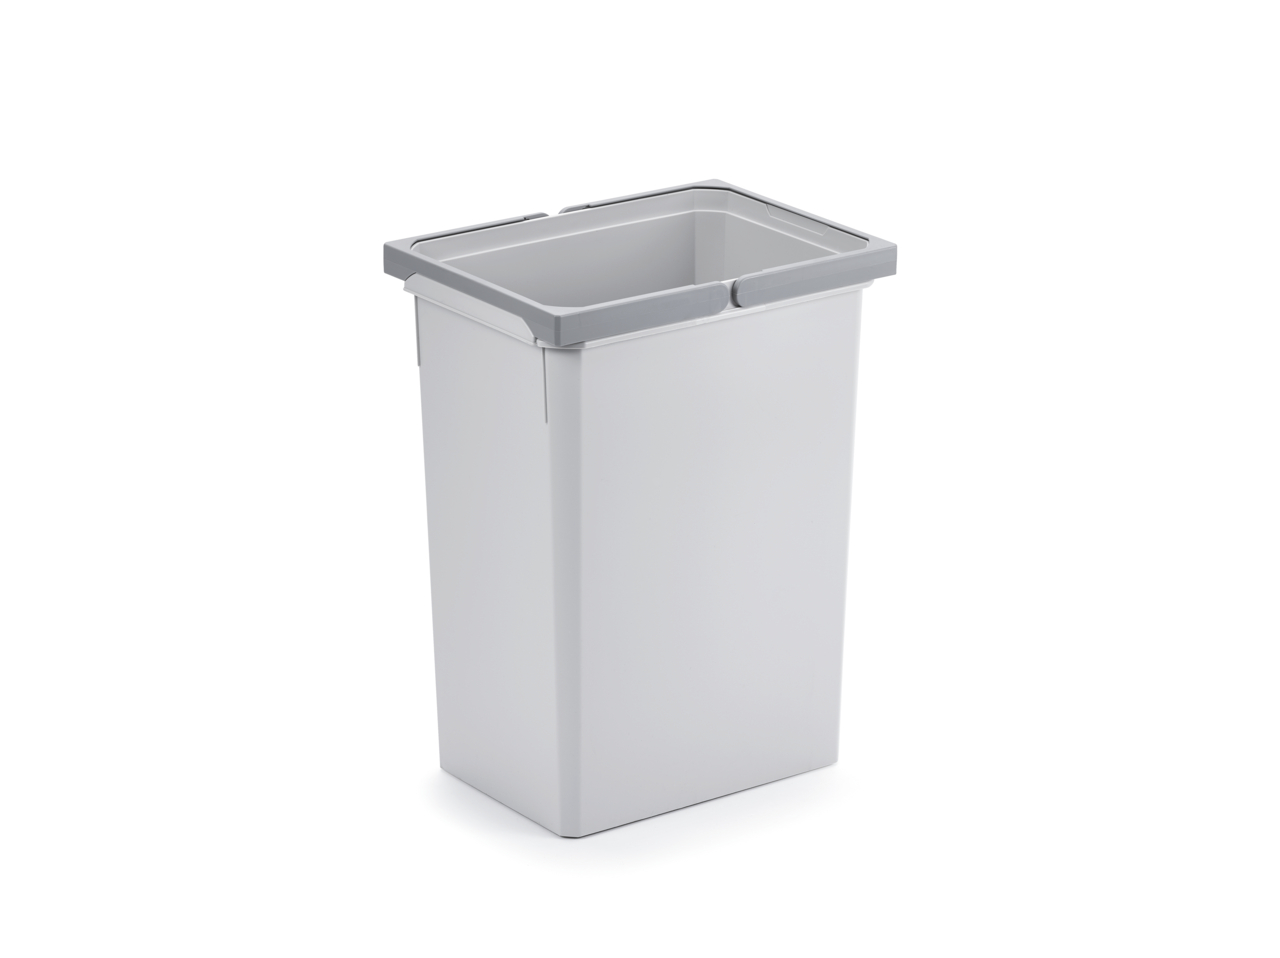  Cox® system container, light grey, 29.5 liters